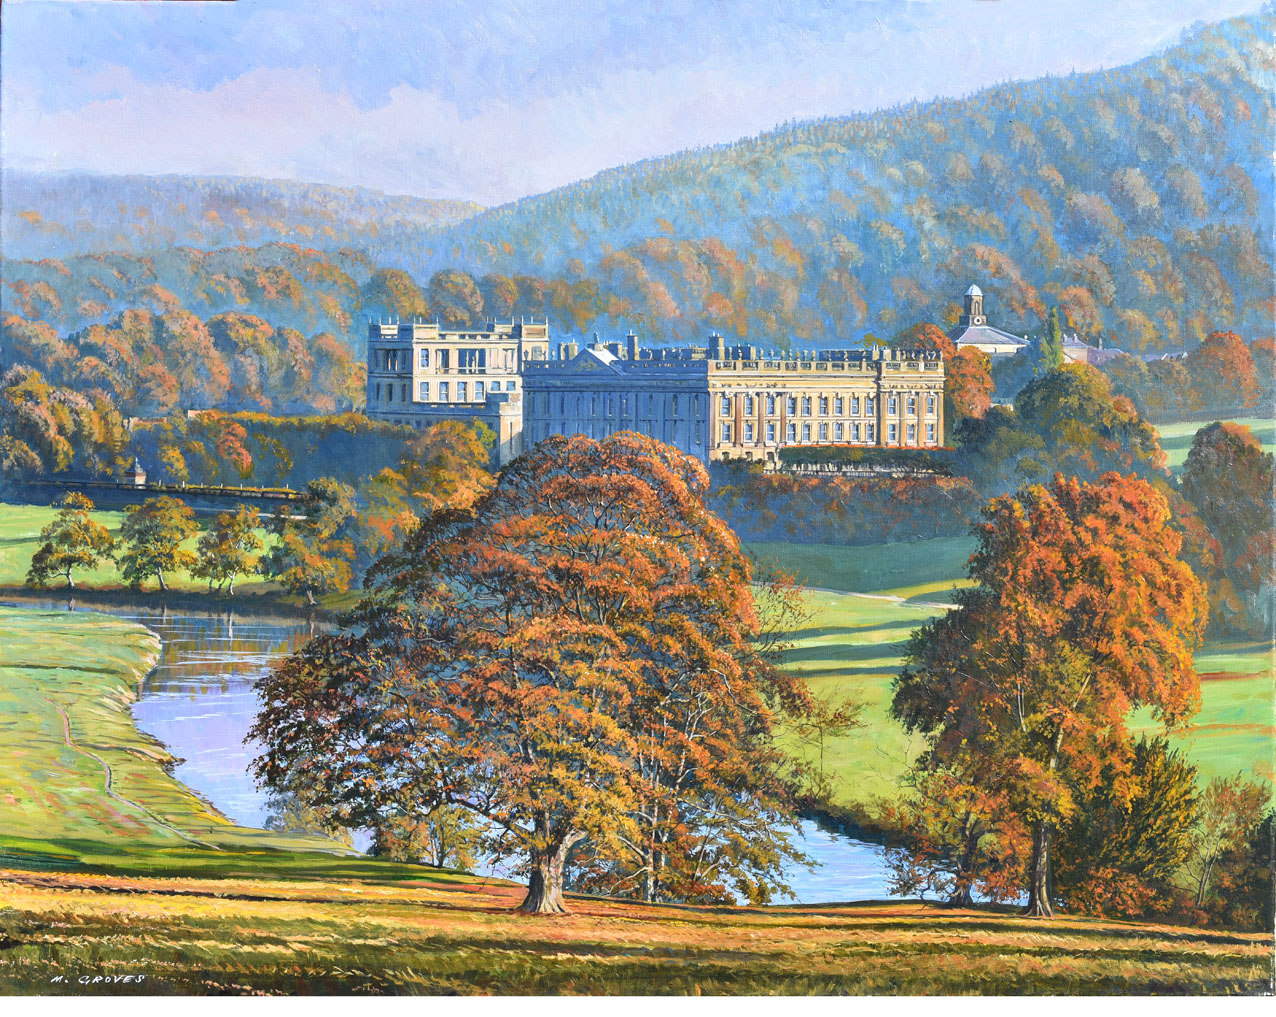 Autumn Gold, Chatsworth by Michael Groves